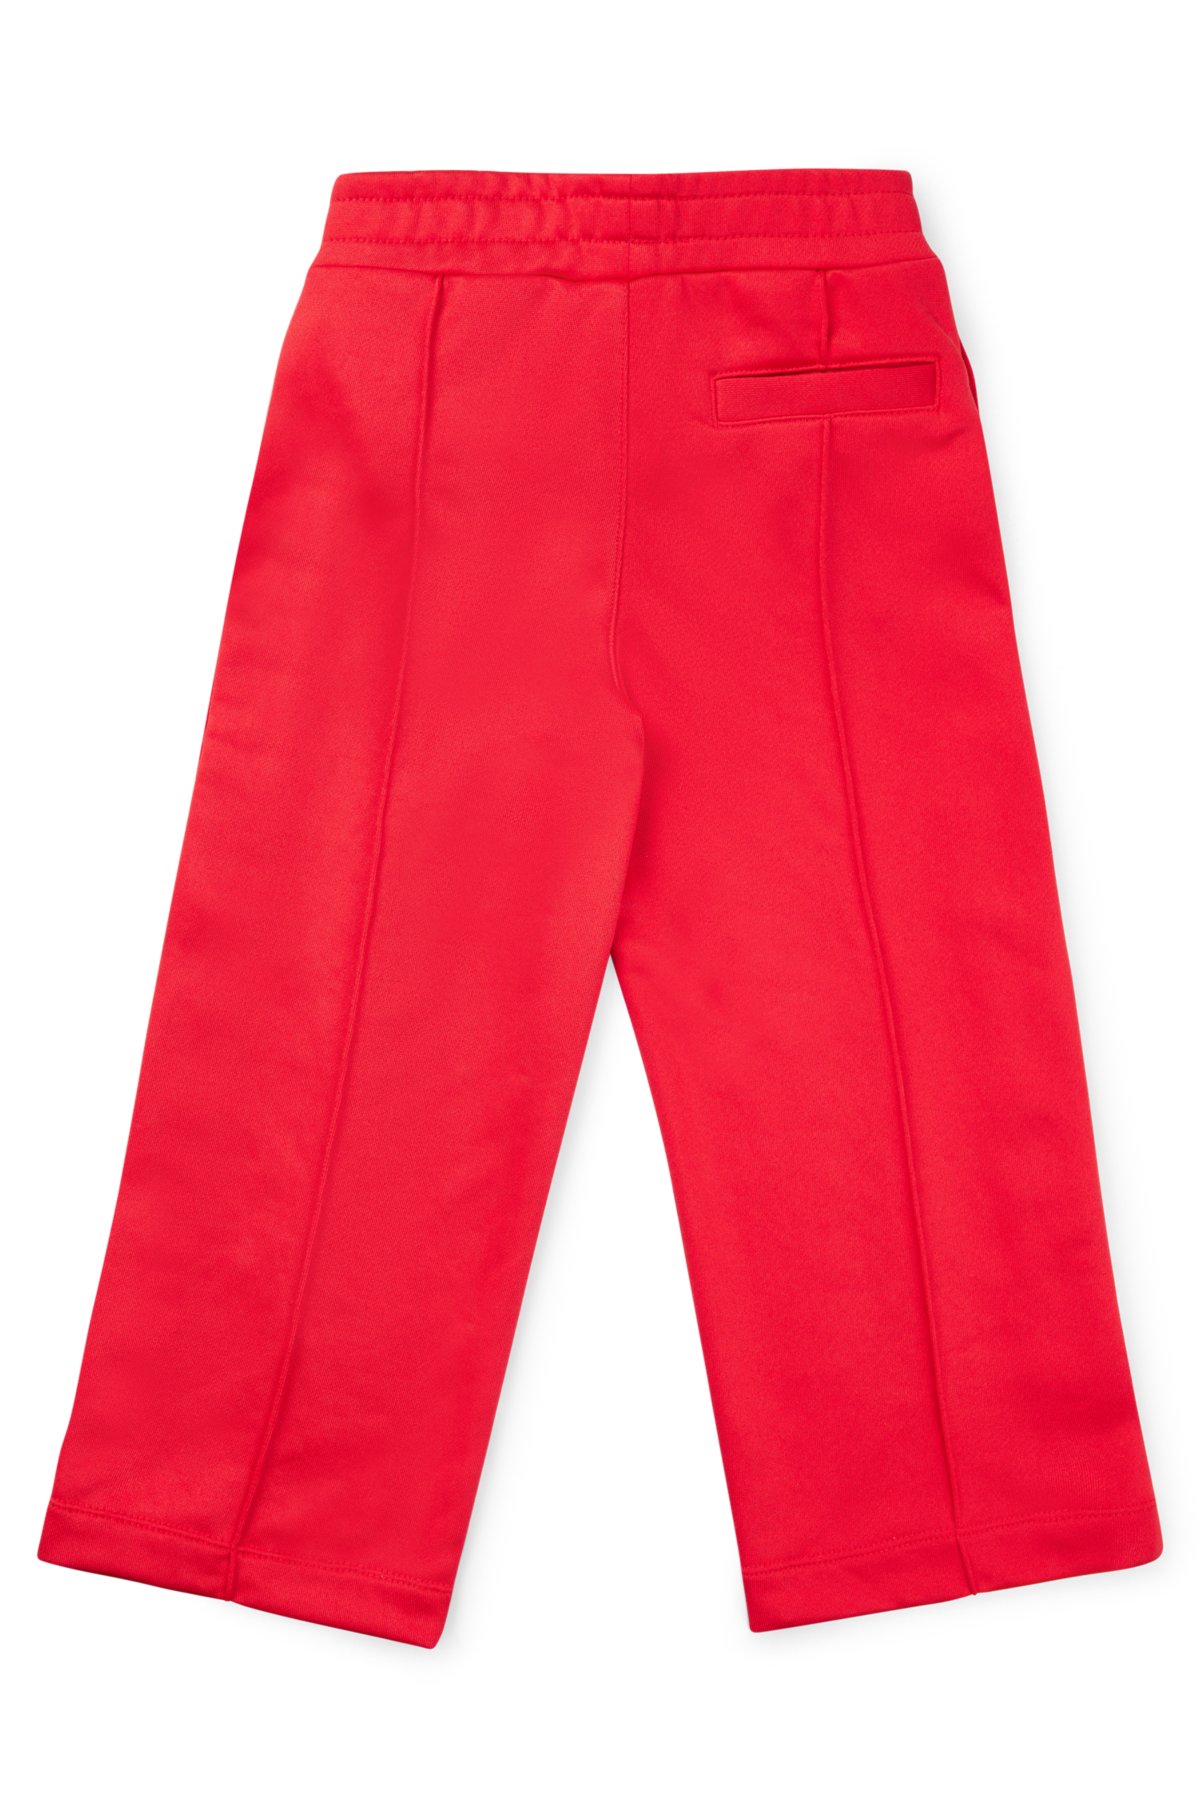 Kids' tracksuit bottoms with press-stud side seams, Red